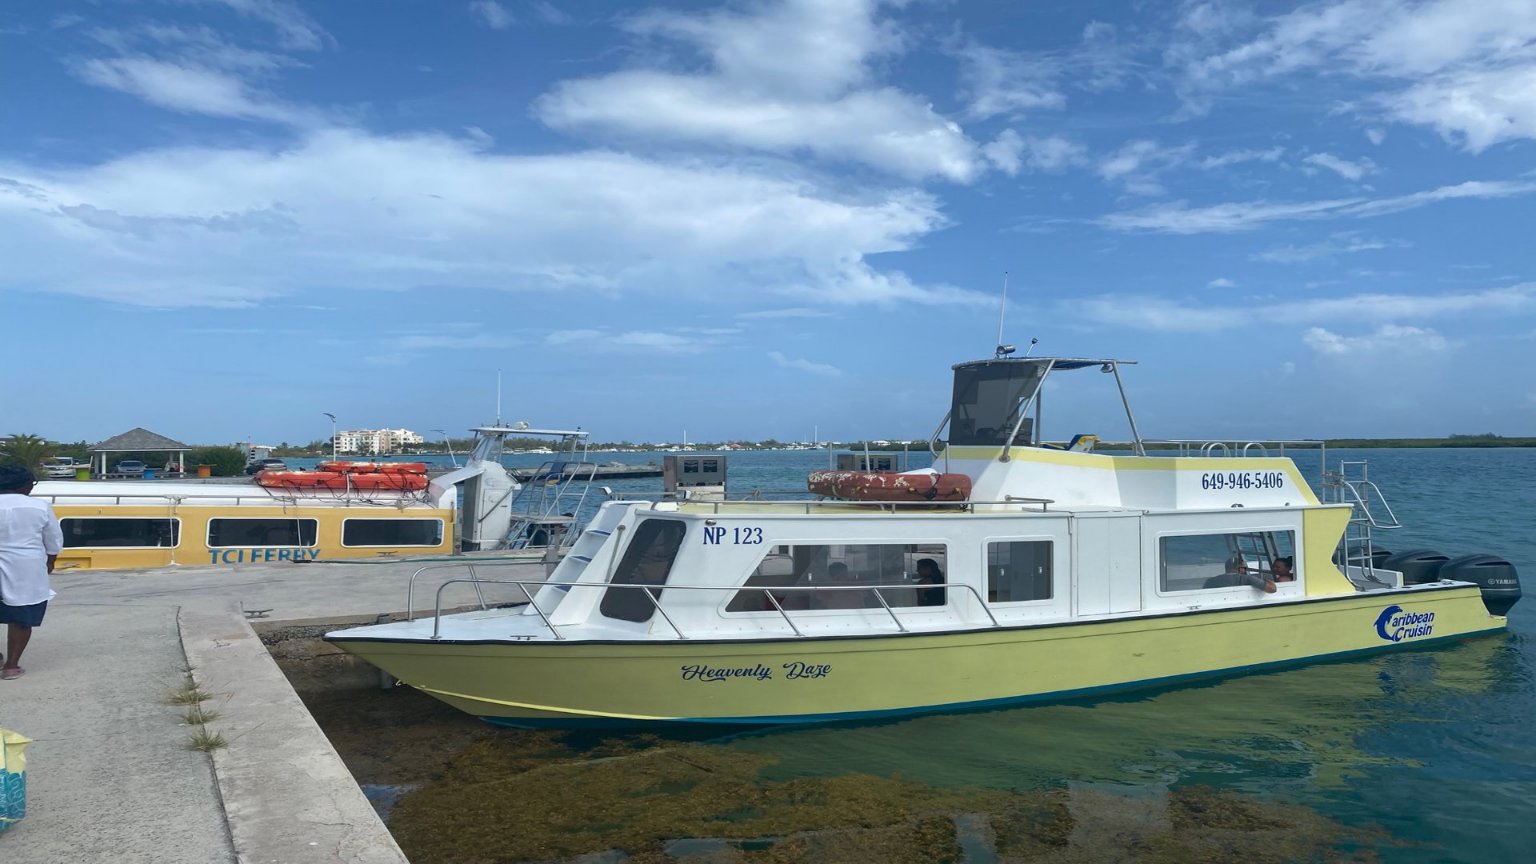 A view of a ferry at a dock in Providenciales